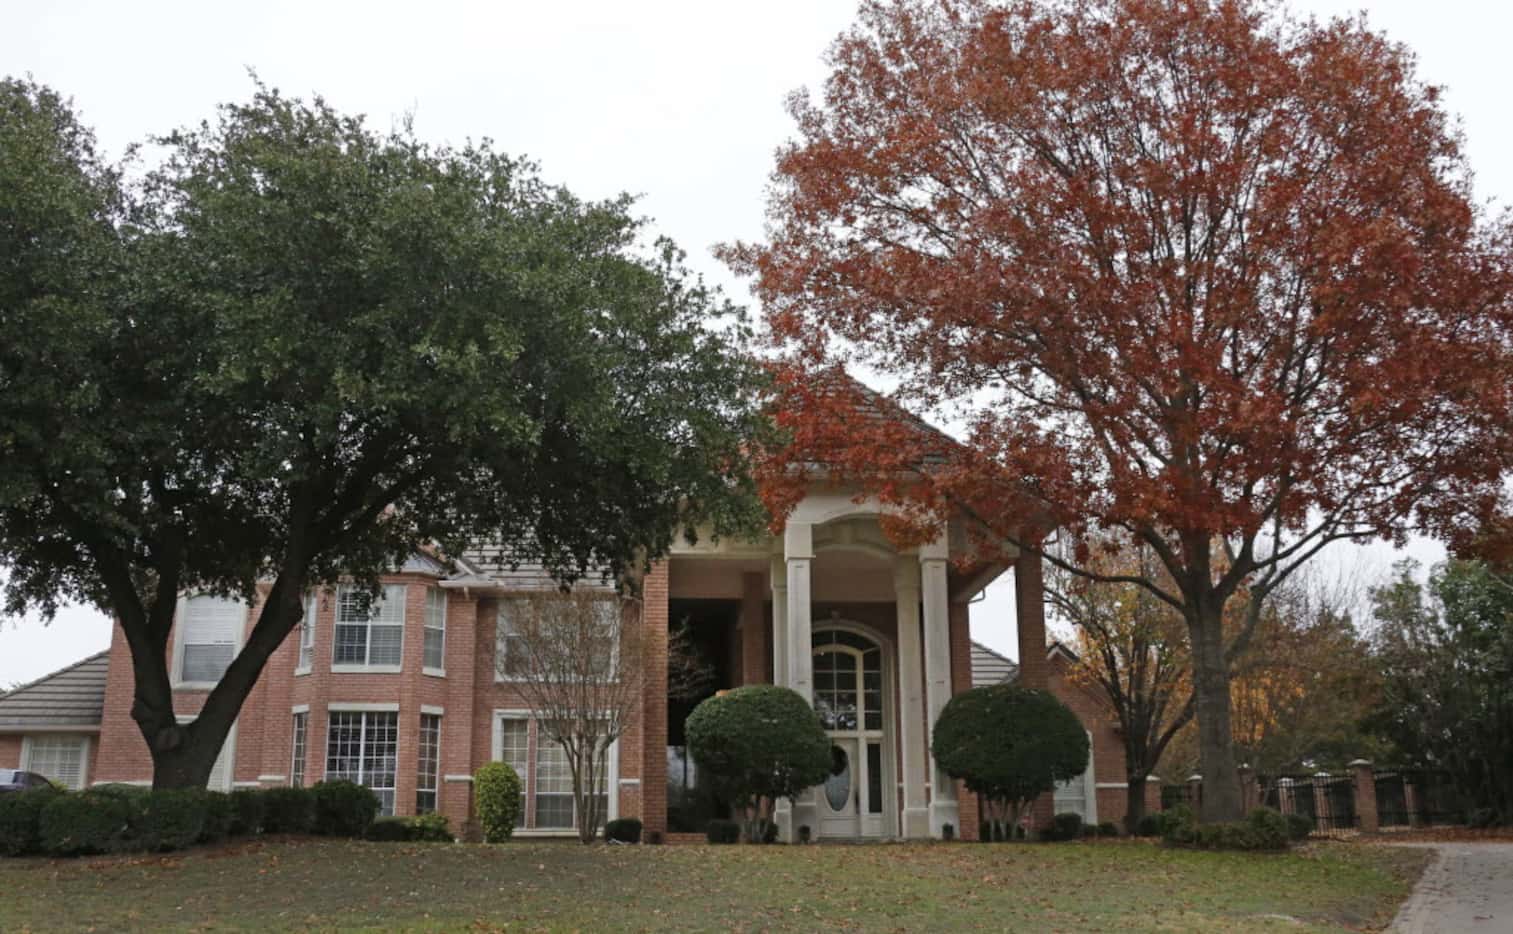 The former DeSoto home of Dez Bryant. (2014 File Photo/Louis DeLuca)